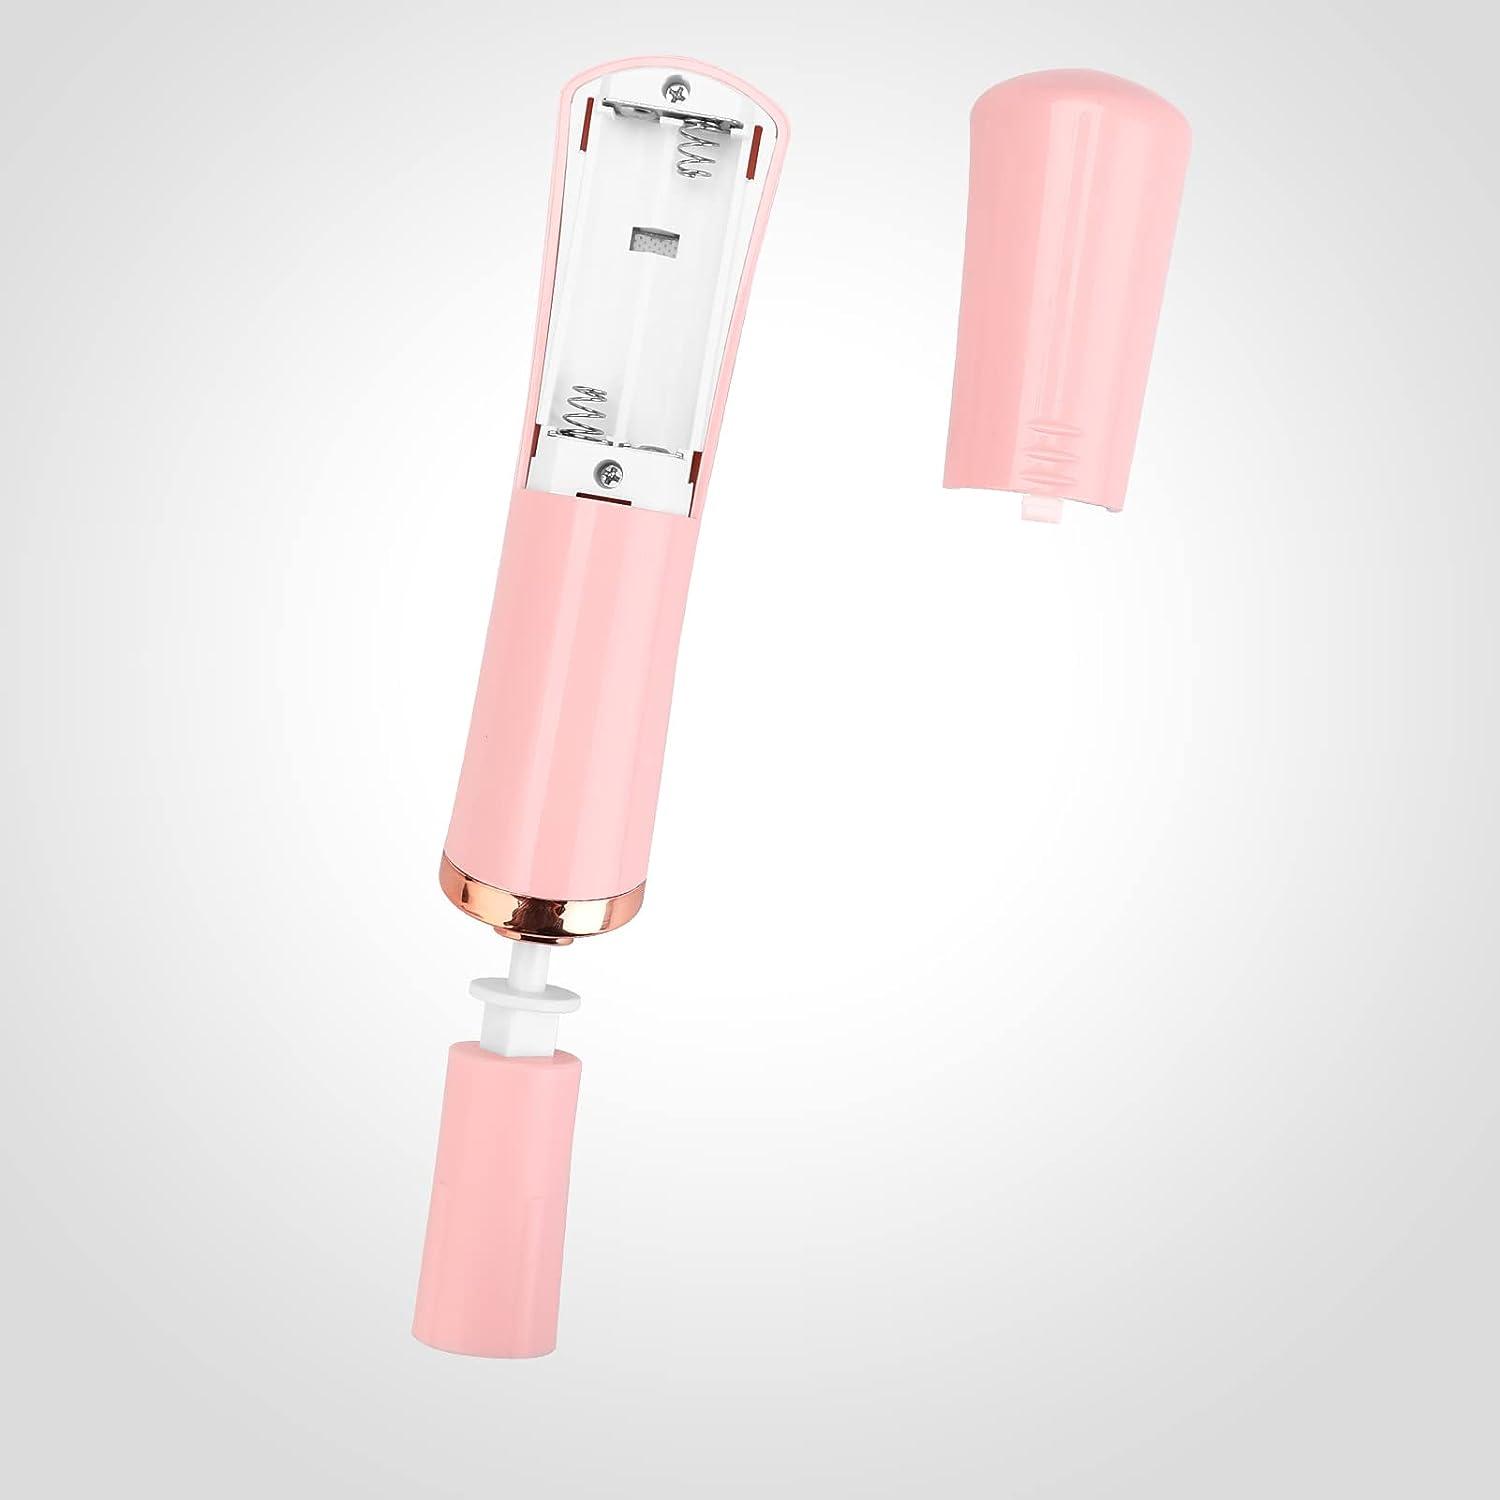 Pink Electric Nail Lacquer Shaker, Glue Shaker for Eyelash Extensions,  Eyelash Lacquer Shaker, Electric Shaker Time Saving Handsfree Tool Glue  Nails